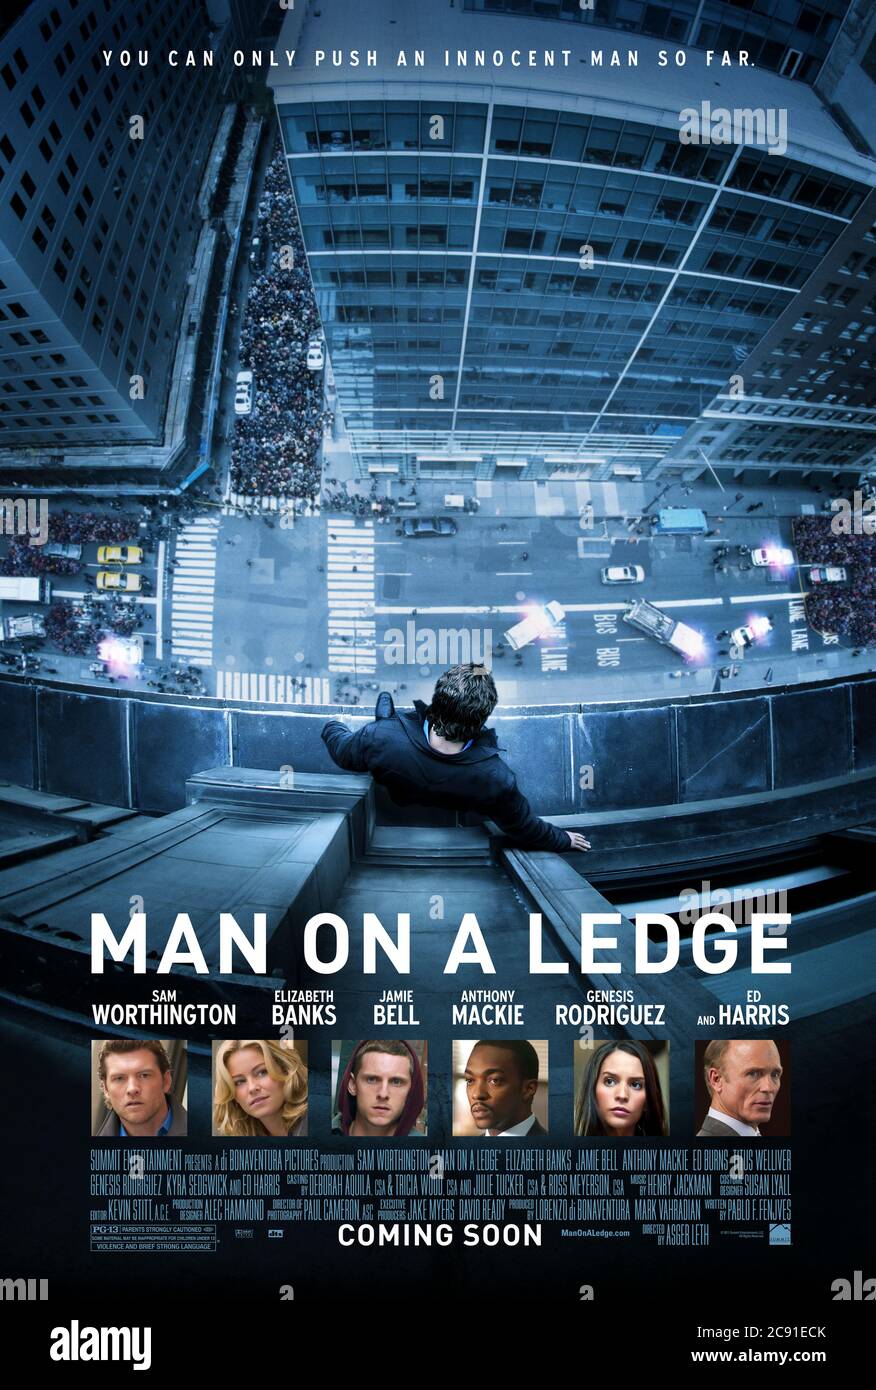 Man on a Ledge (2012) directed by Asger Leth and starring Sam Worthington, Elizabeth Banks, Jamie Bell and Ed Harris. A man threatens to commit suicide as the world looks on but all is is not what it seems. Stock Photo